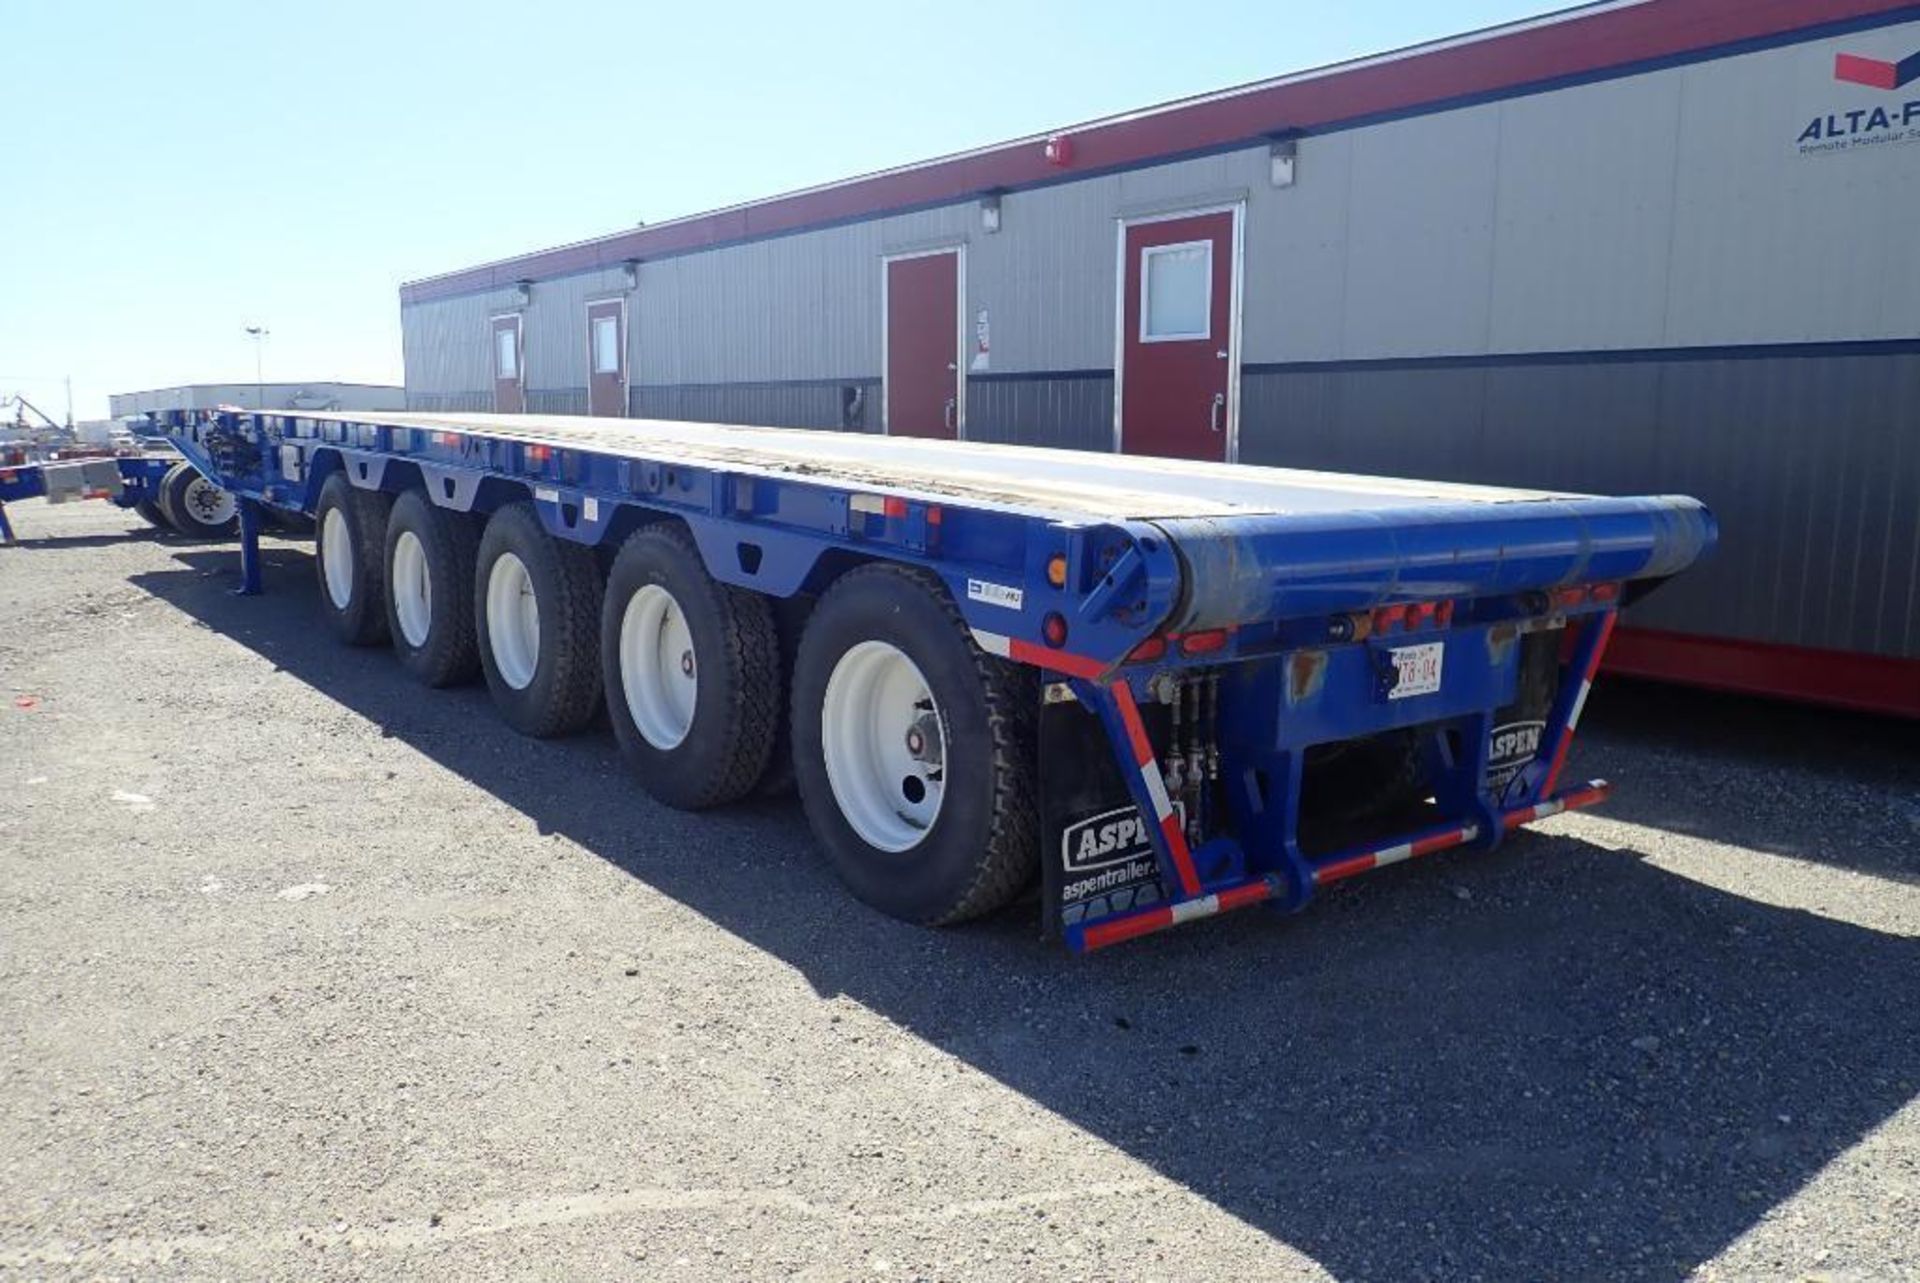 2015 Aspen HHT/RL 5-Axle Dually 35' Highboy Trailer. VIN 2A9LB8050FN125205. NOTE: NEW, UNUSED. - Image 2 of 8